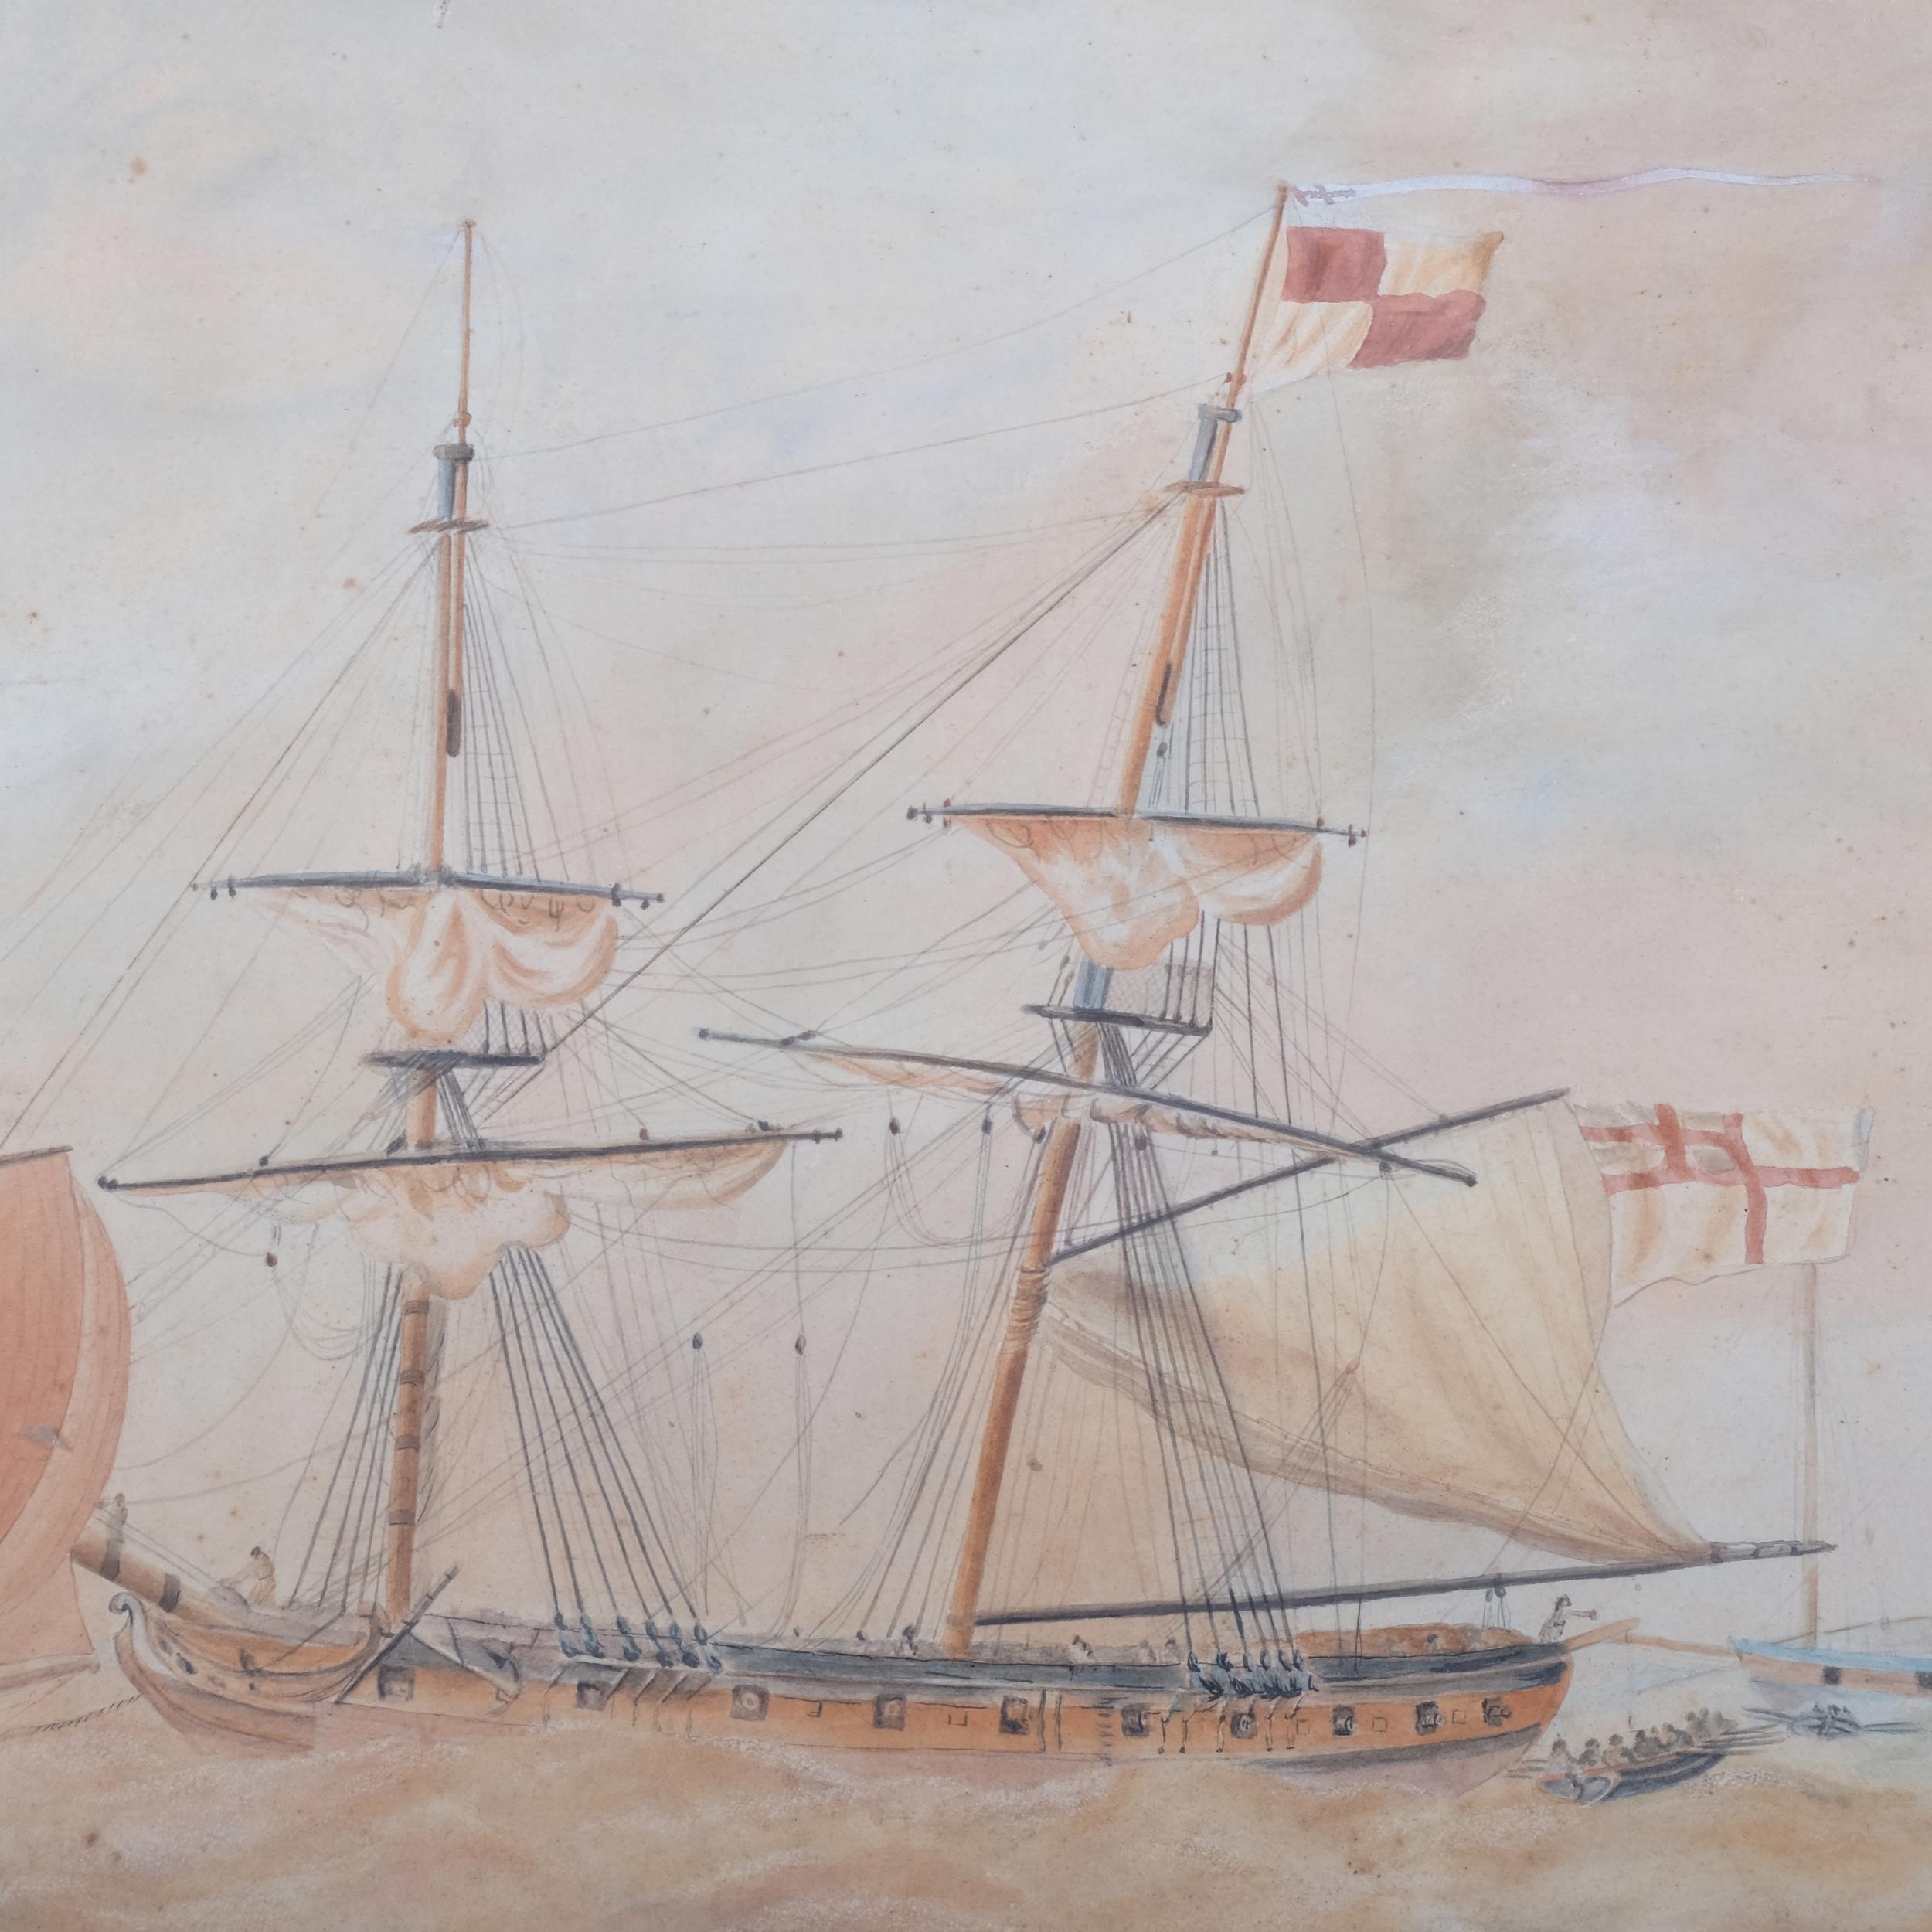 Watercolour, signed and dated, English and Dutch sailing ships involved in trading of merchandise, - Image 2 of 2